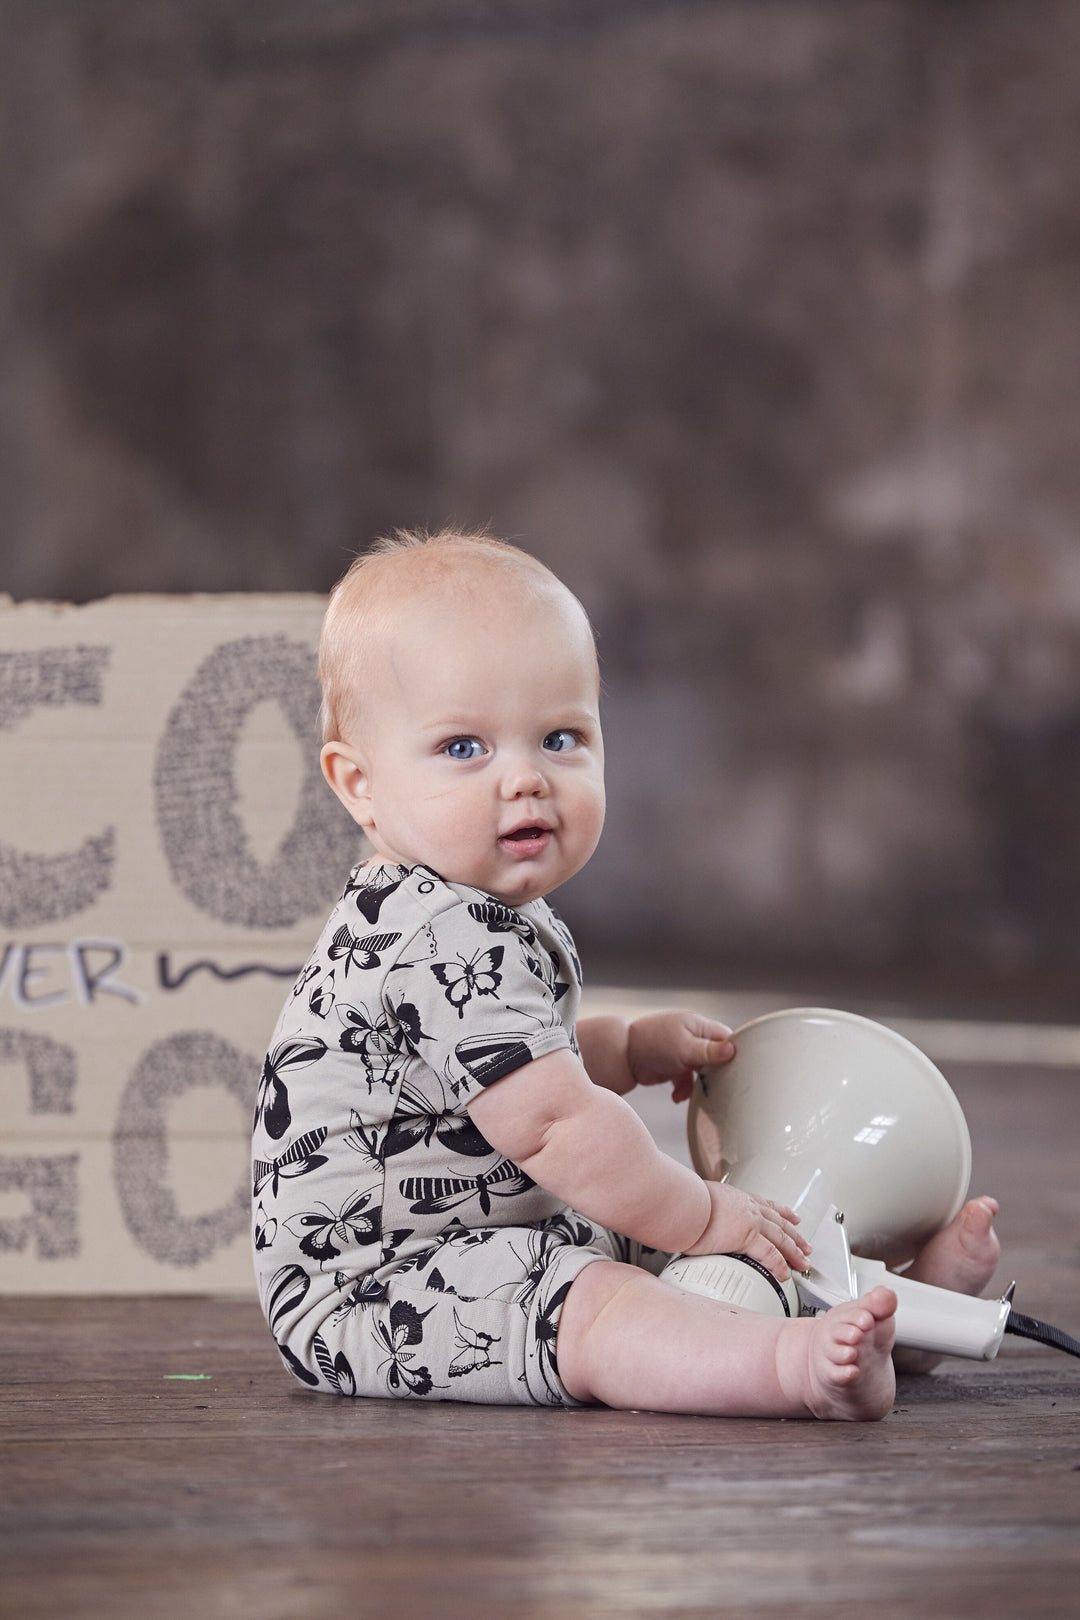 A baby sitting on a wooden floor wearing an Anarkid Organic Cotton Short Sleeve Romper with a GOTS certified organic cotton short sleeve romper with a sign on it.